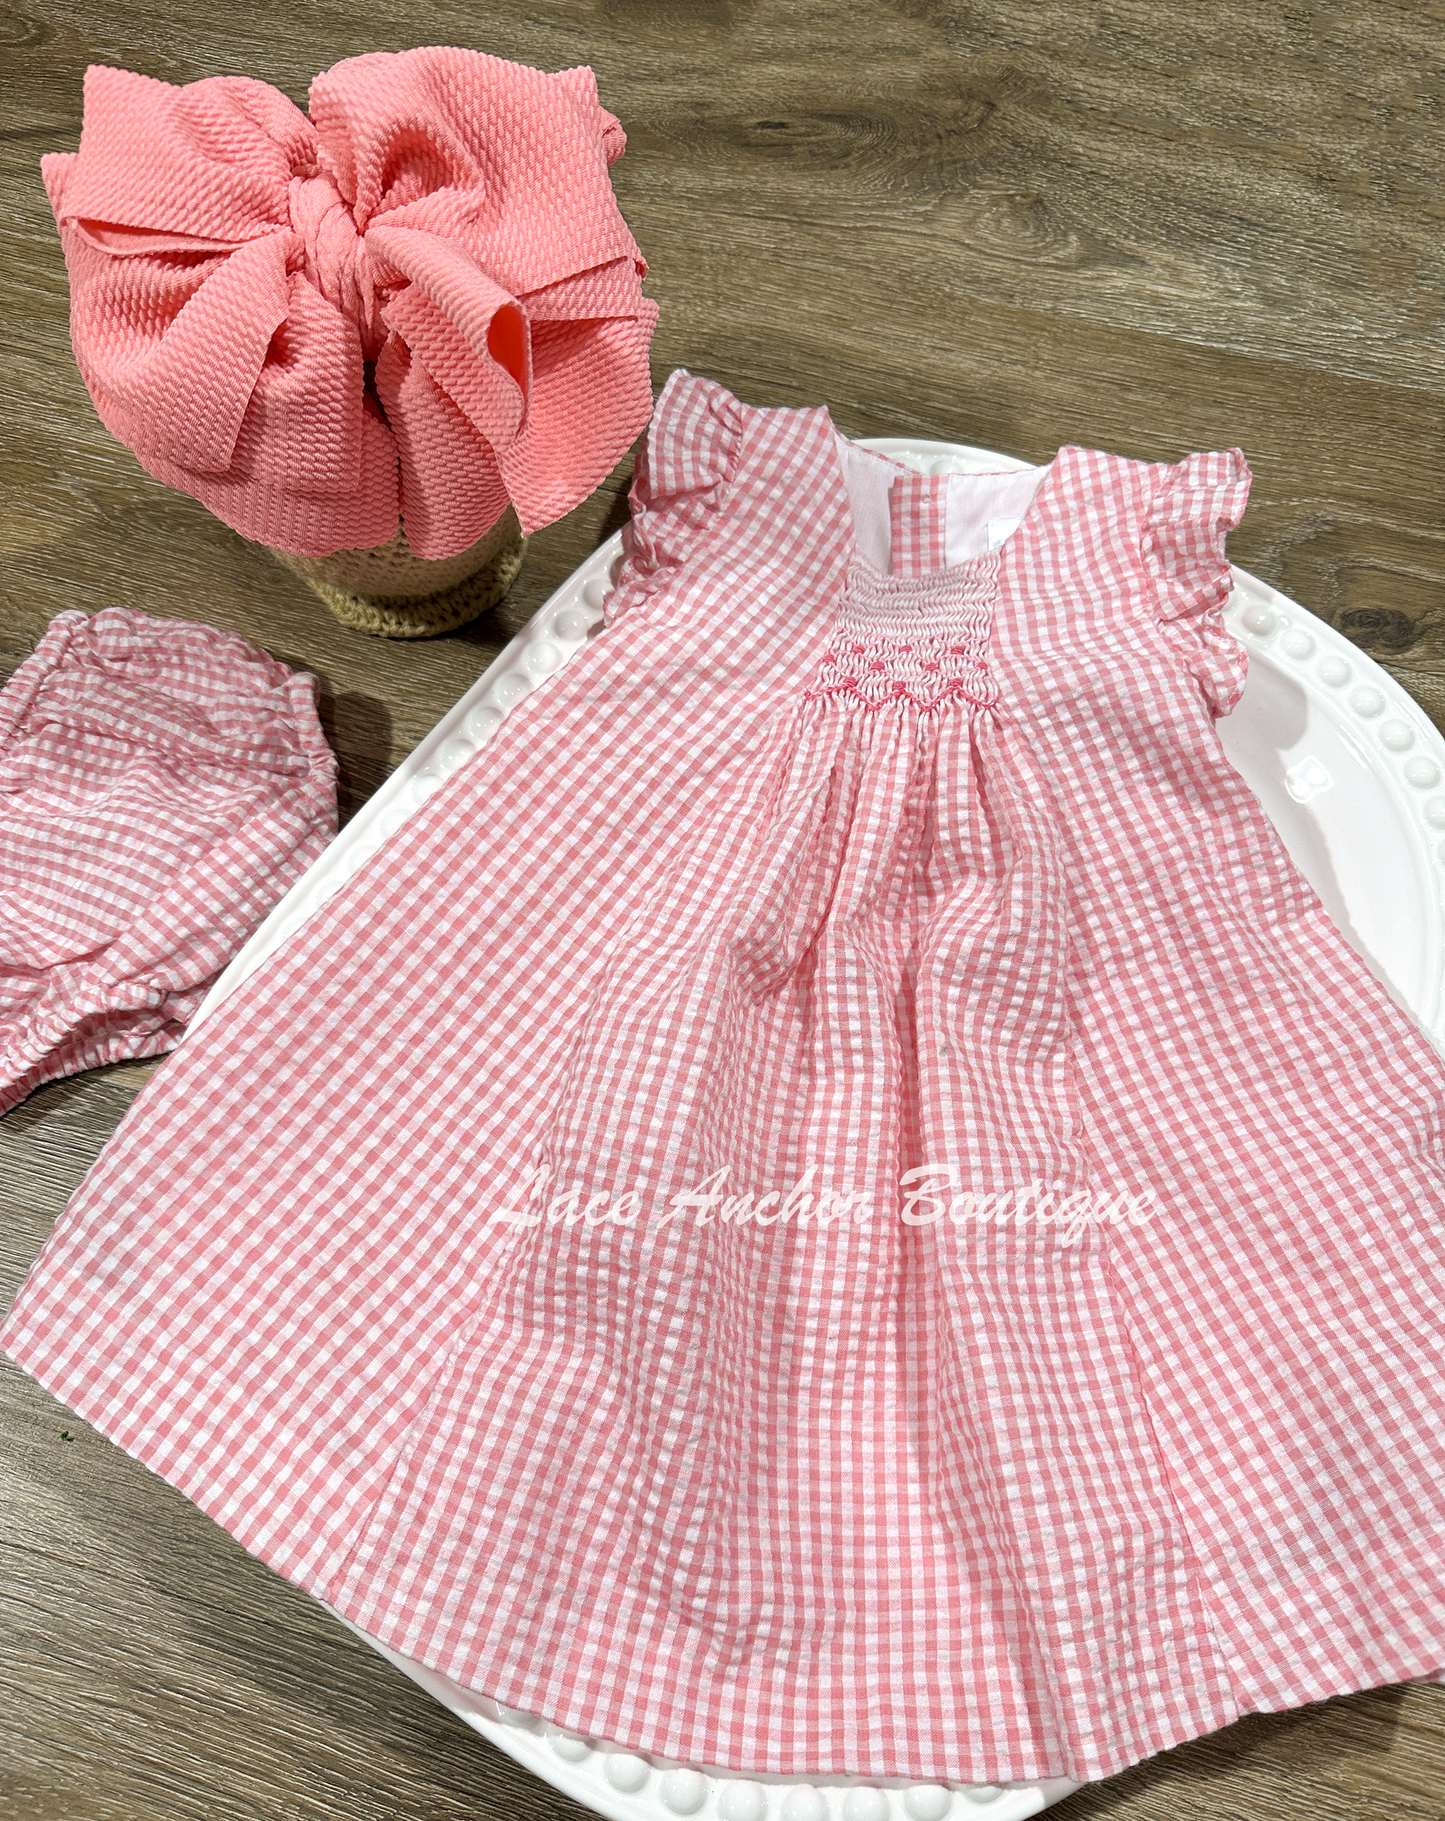 coral pink gingham seersucker baby girls smocked dress set with embroidery and smocking. 